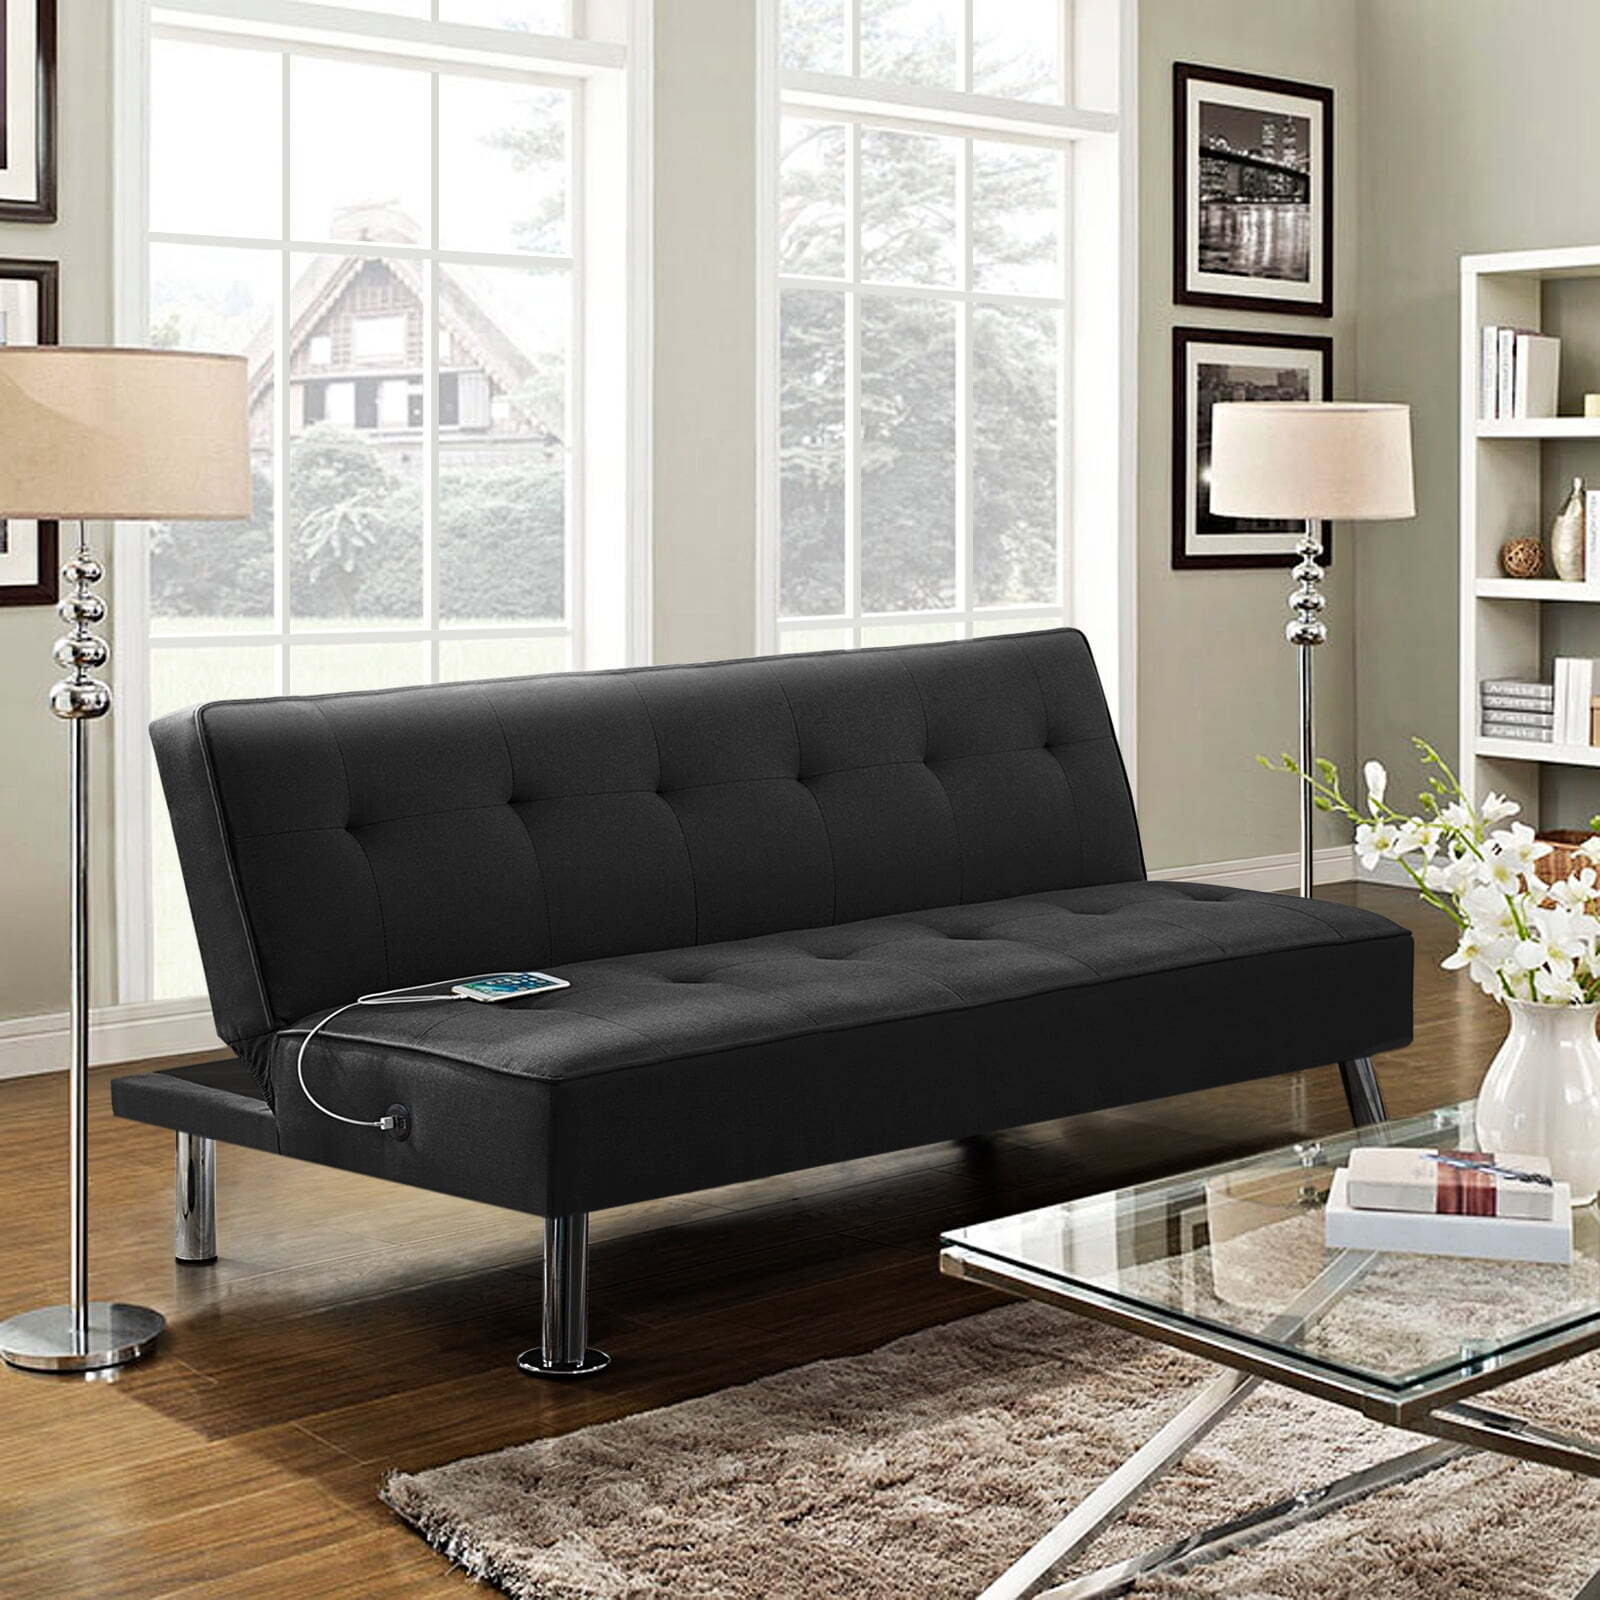  Modern Fabric Convertible Futon with USB, Black Unbranded